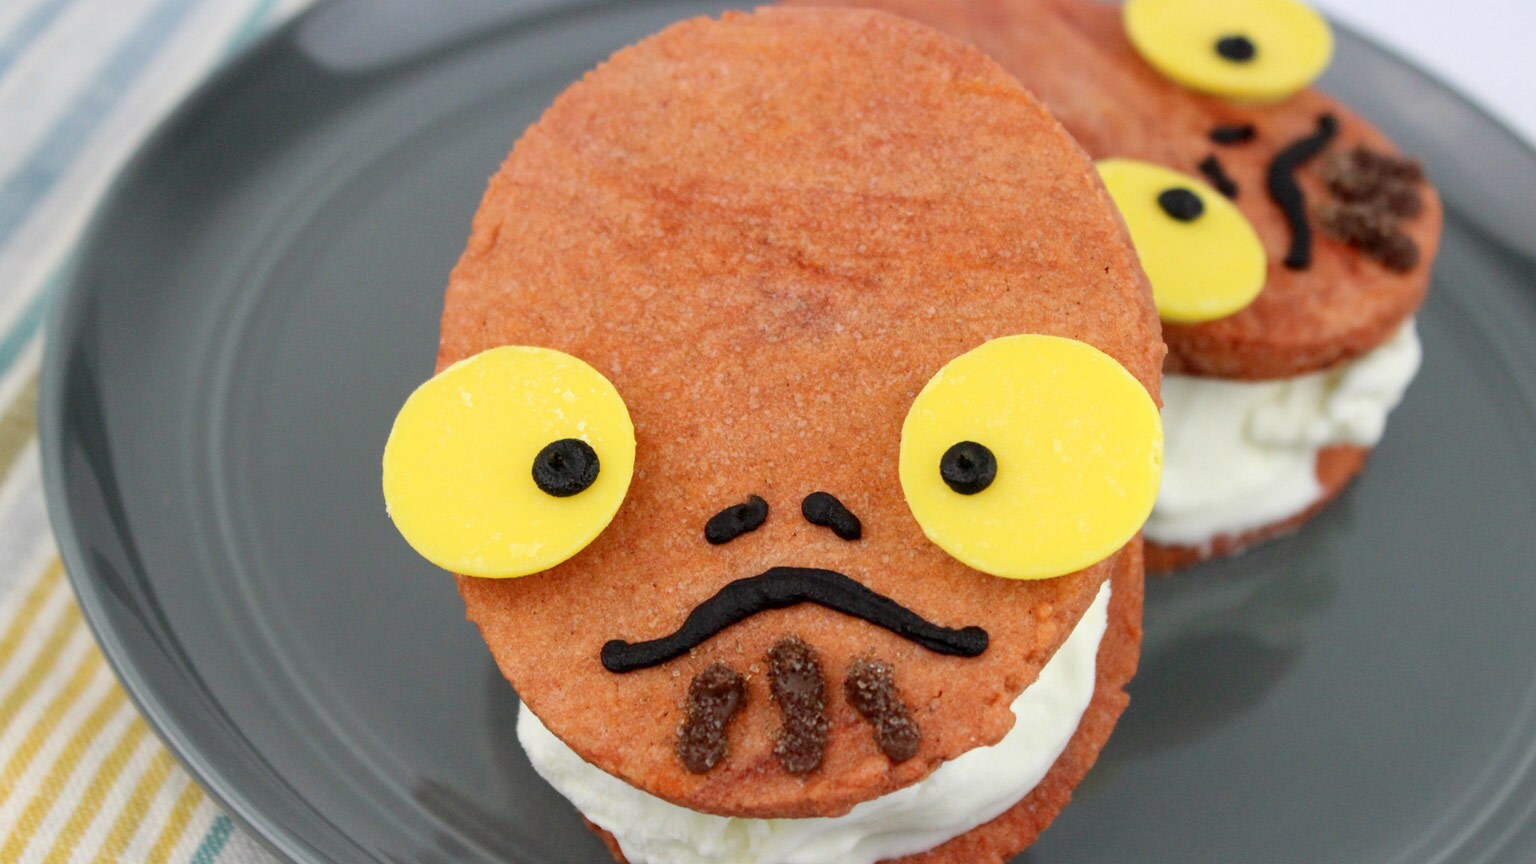 Concentrate All Taste Buds on These Delicious Admiral Ackbar Ice Cream Sandwiches